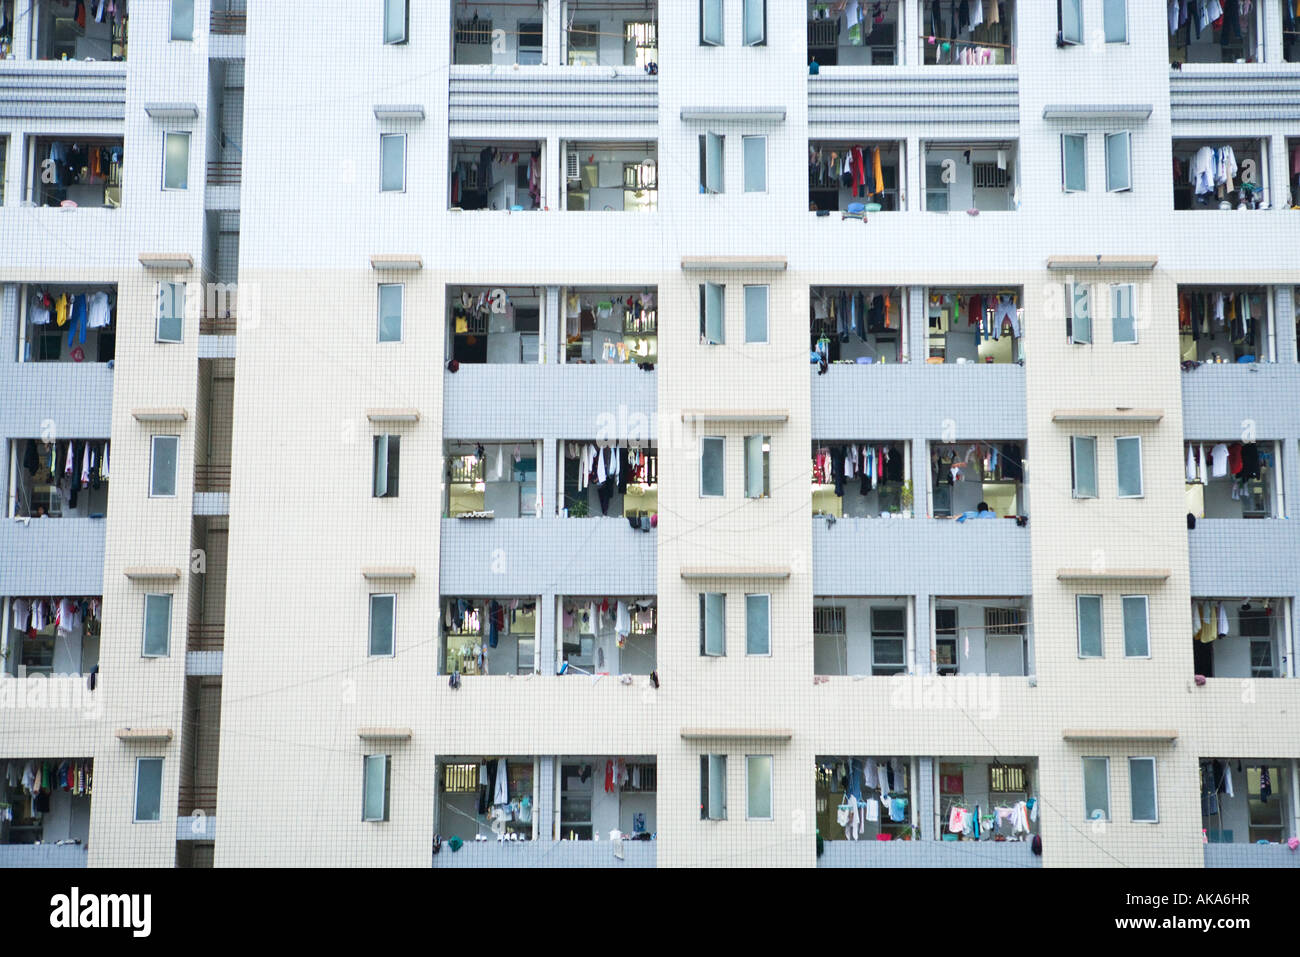 High rise apartment building, laundy hanging out to dry on balconies Stock Photo